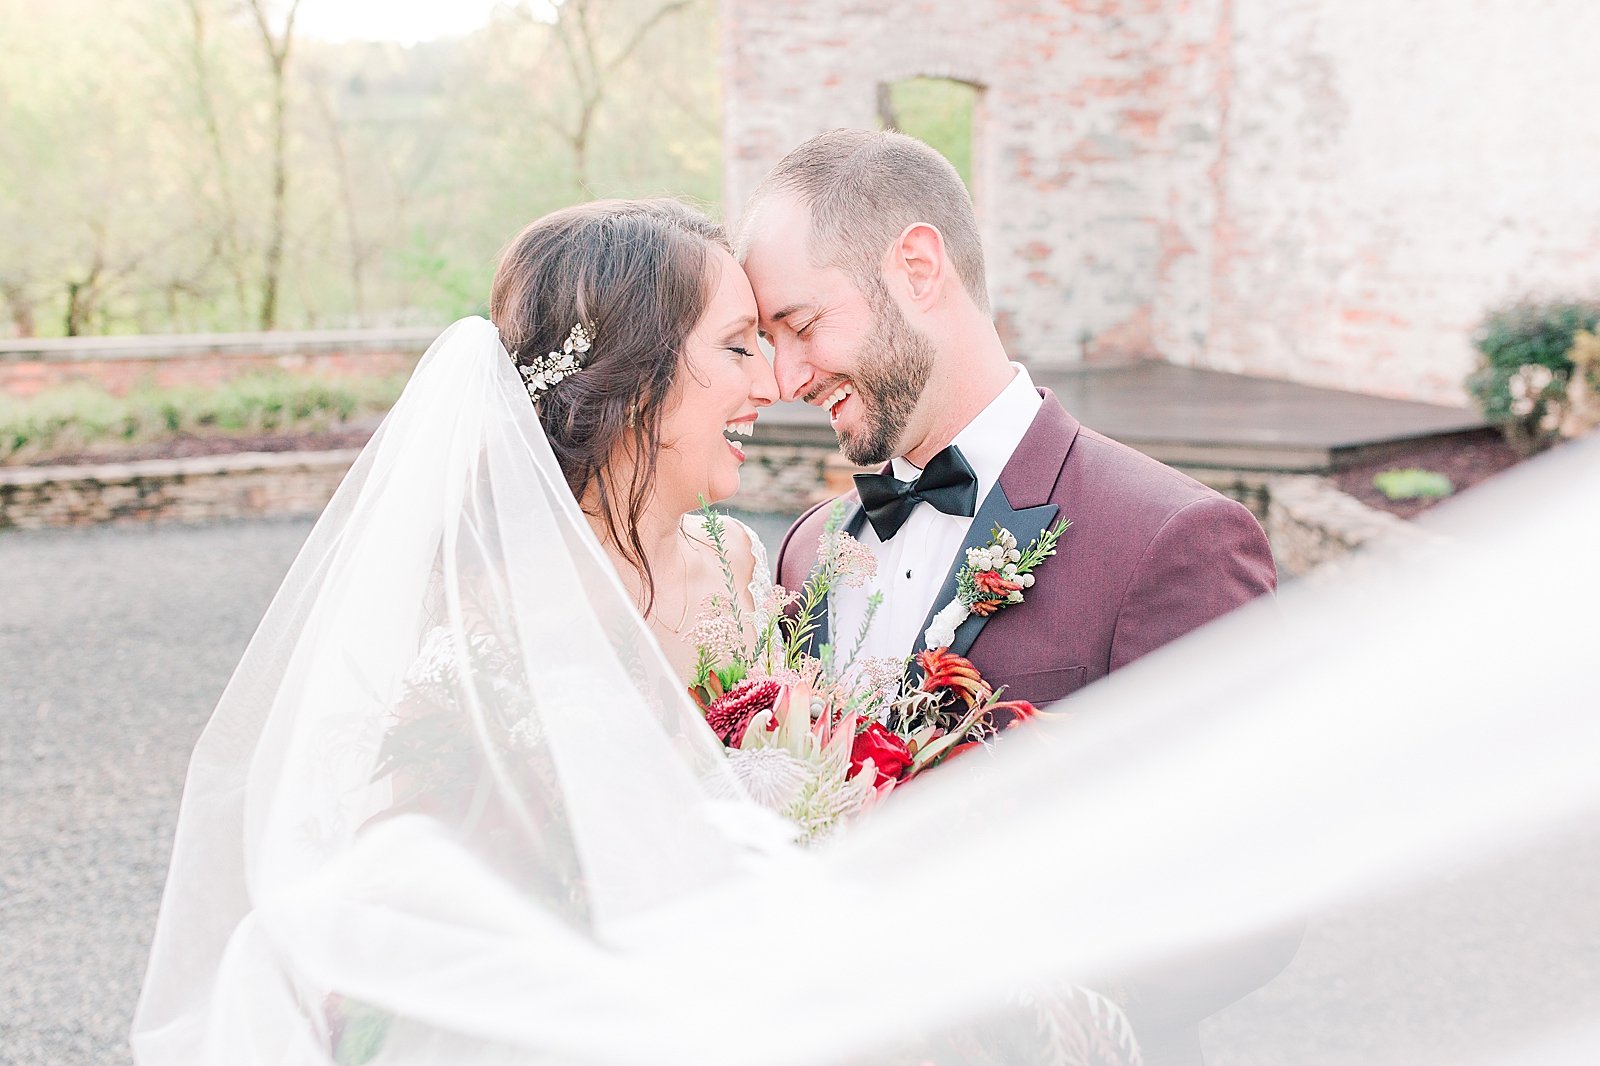 Hackney Warehouse Wedding Bride and Groom Laughing Nose to Nose with veil sweeping in front Photo